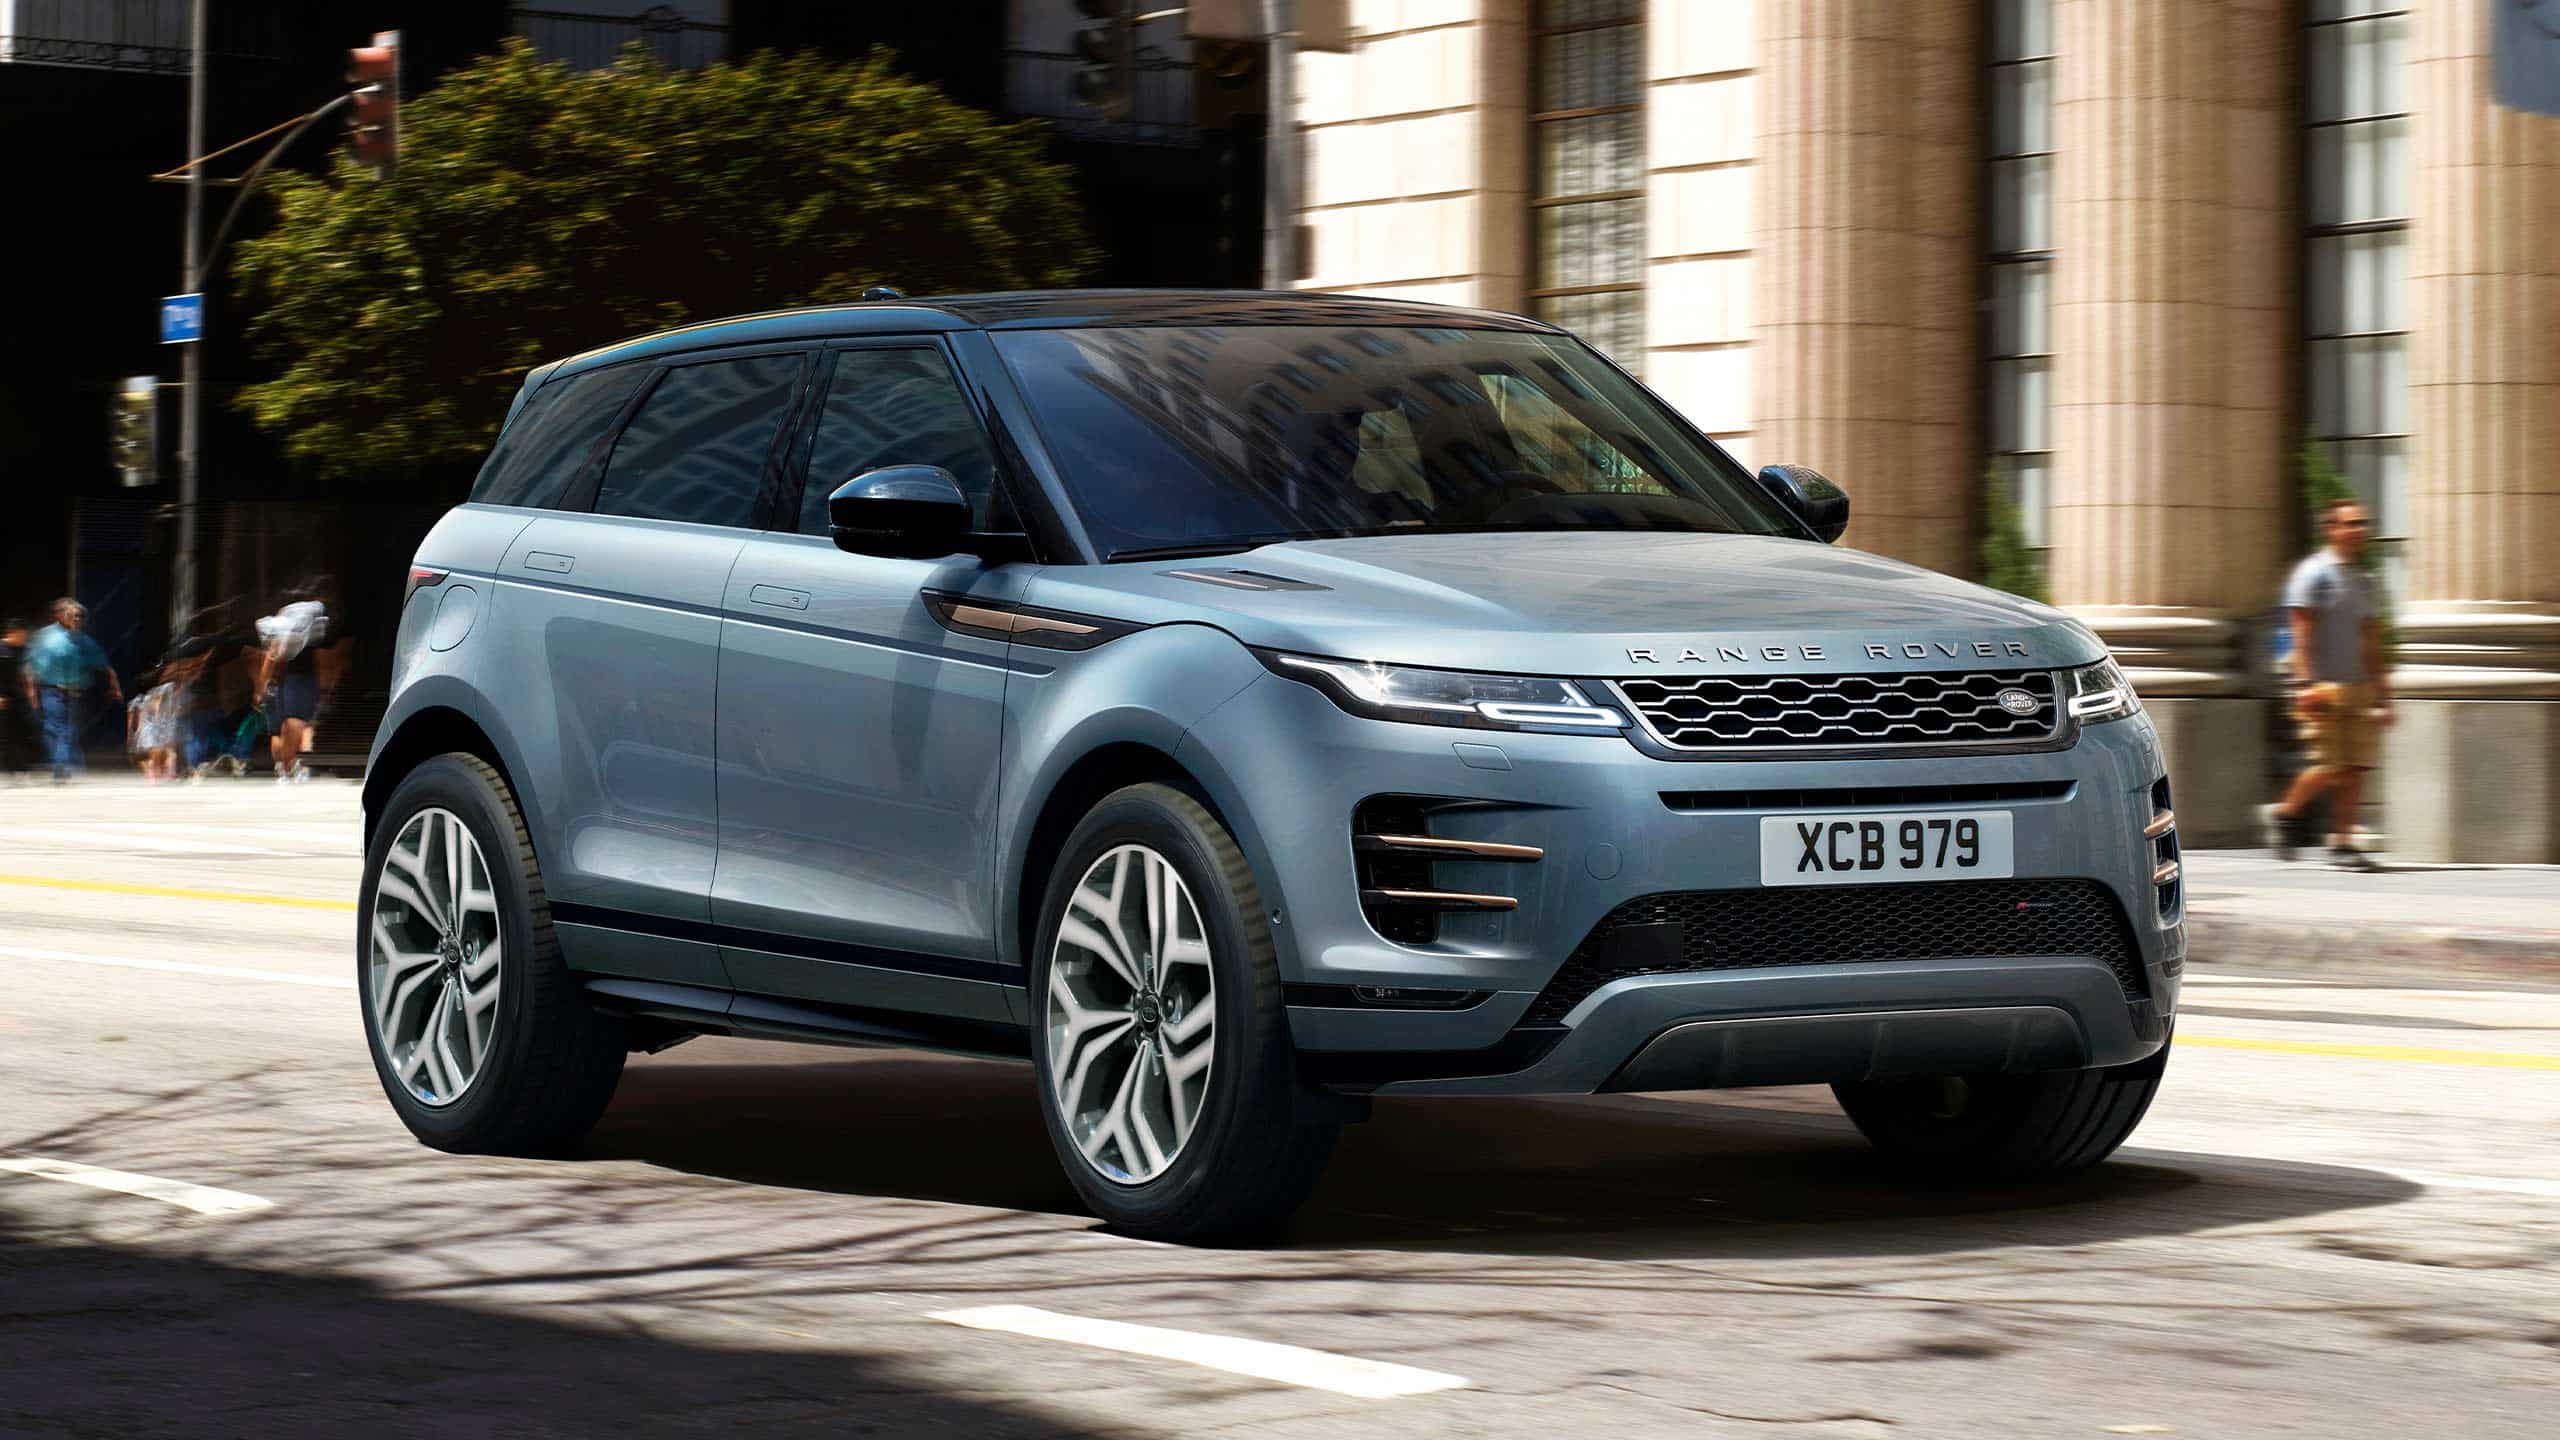 Range Rover Evoque (blue) driving on road